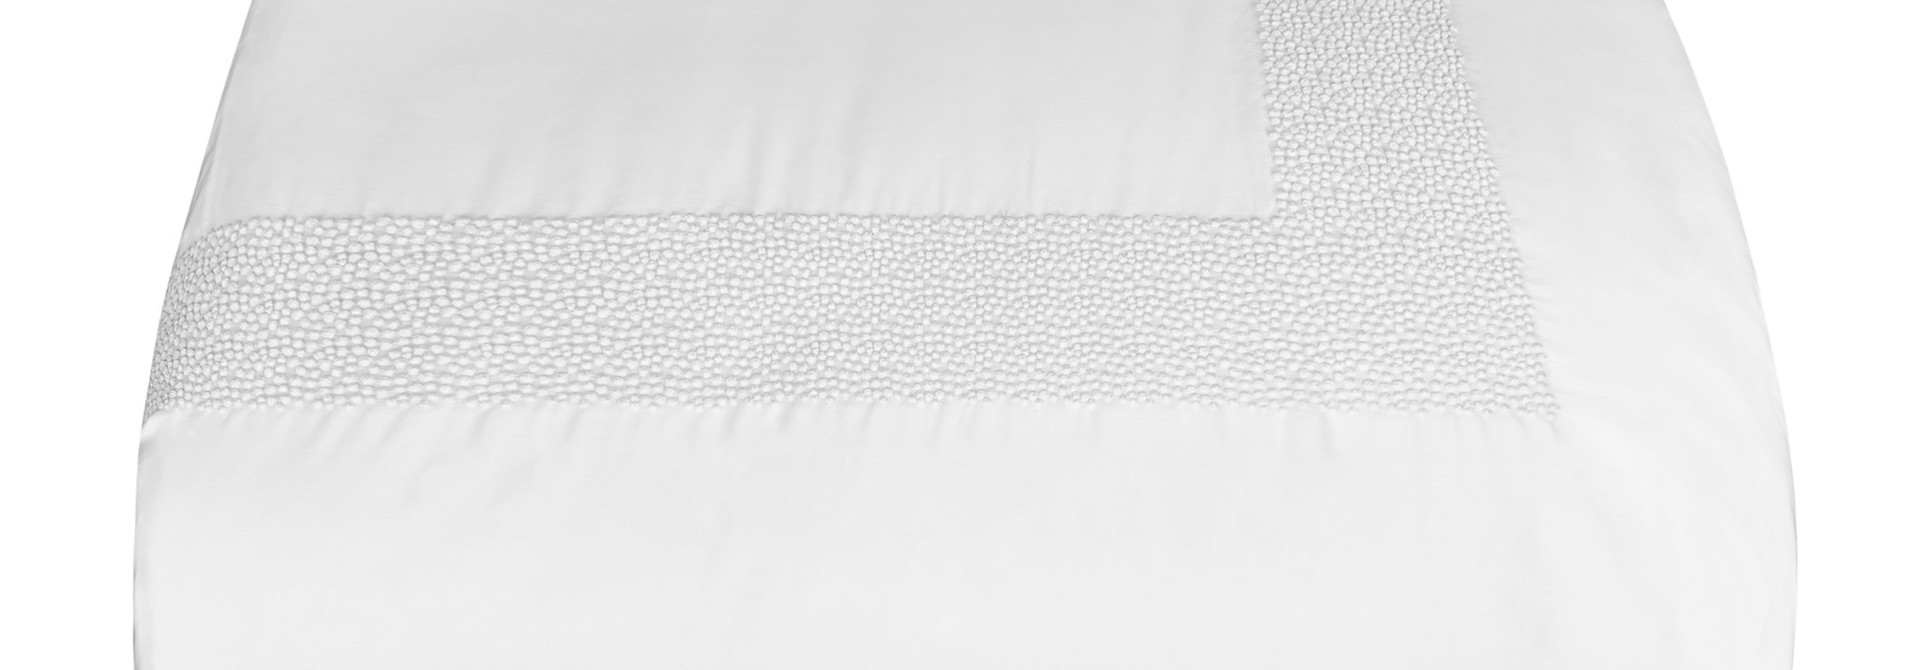 Pearls | The Bedding Collection